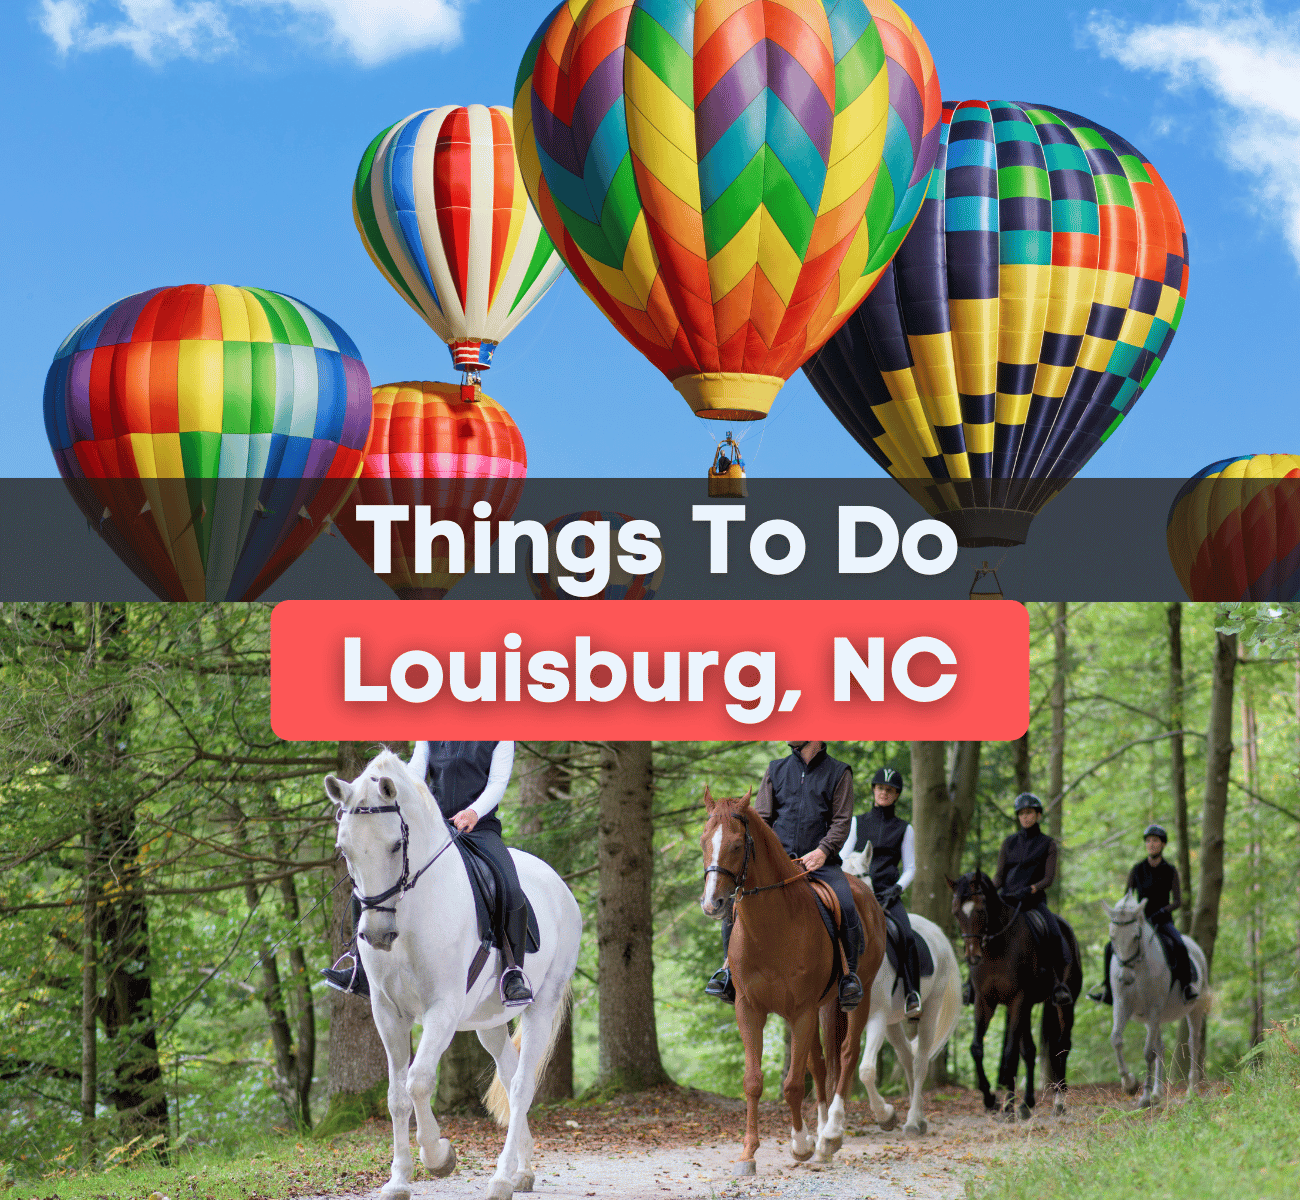 things to do in Louisburg, NC  graphic - horse back riding and hot air balloons